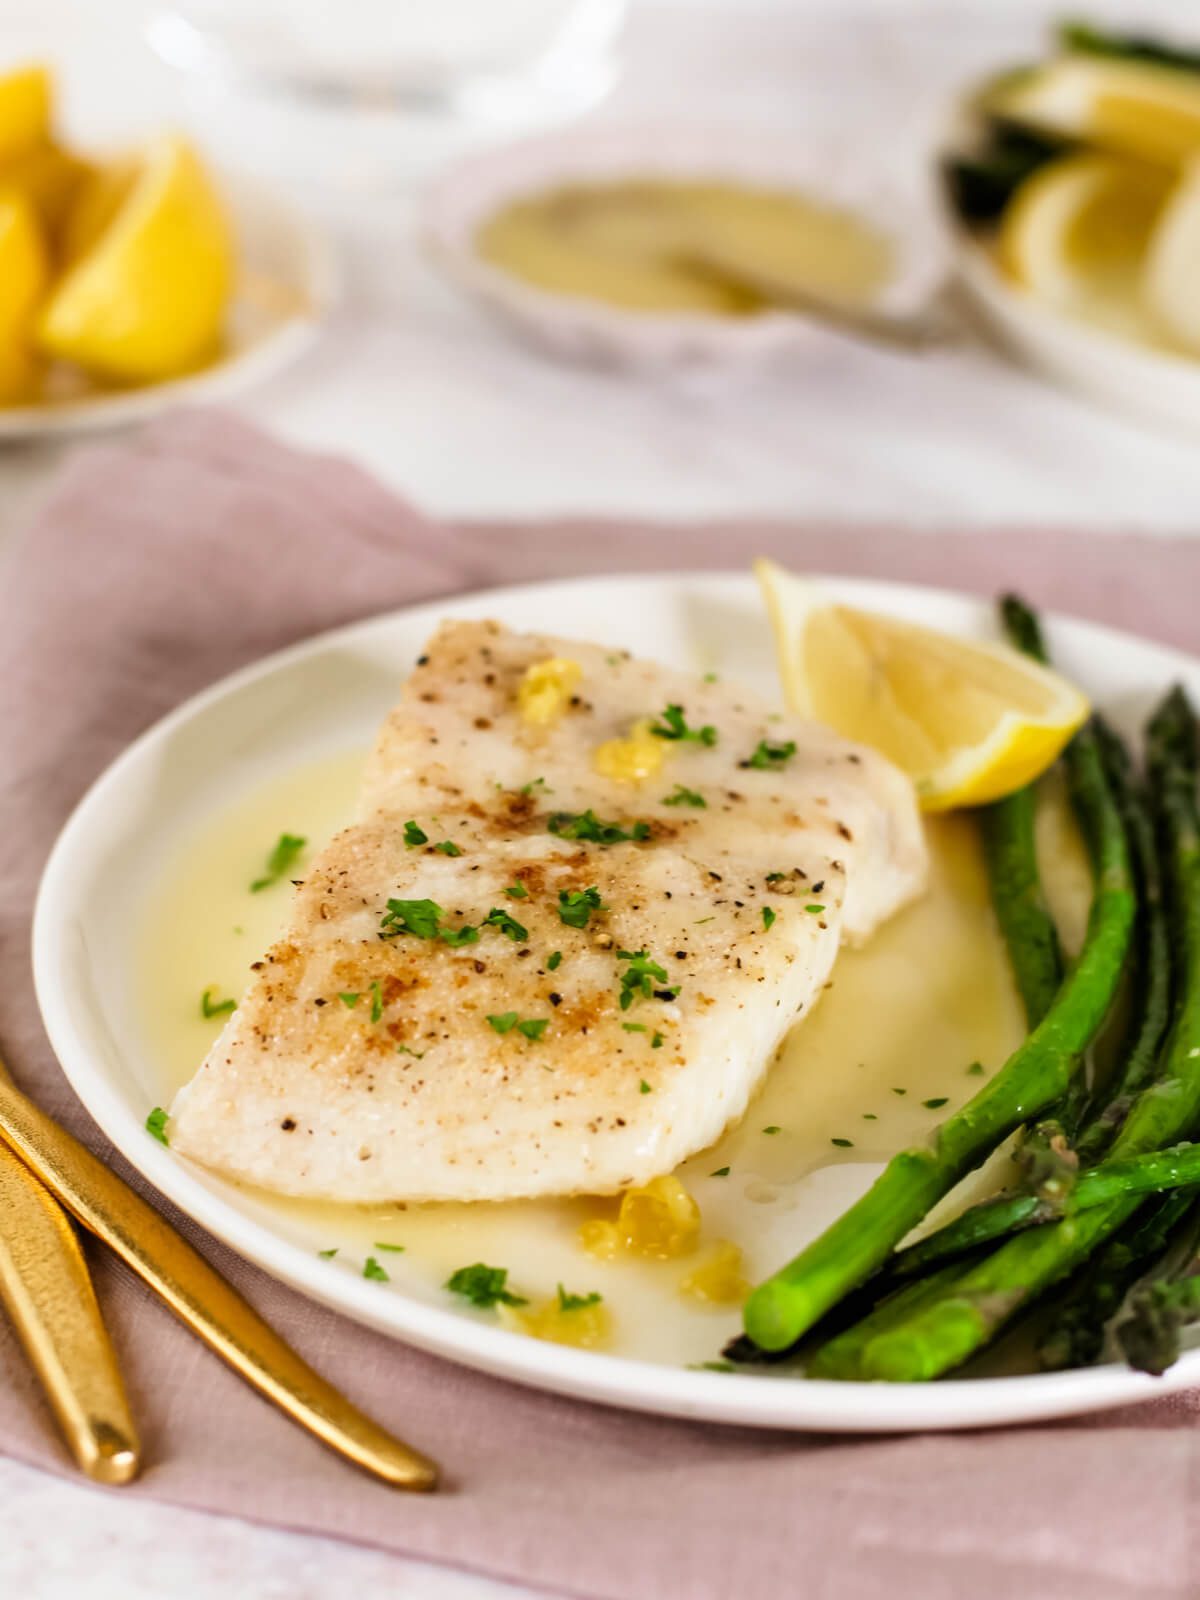 cooked fish with parsley and lemon sauce on a plate with asparagus